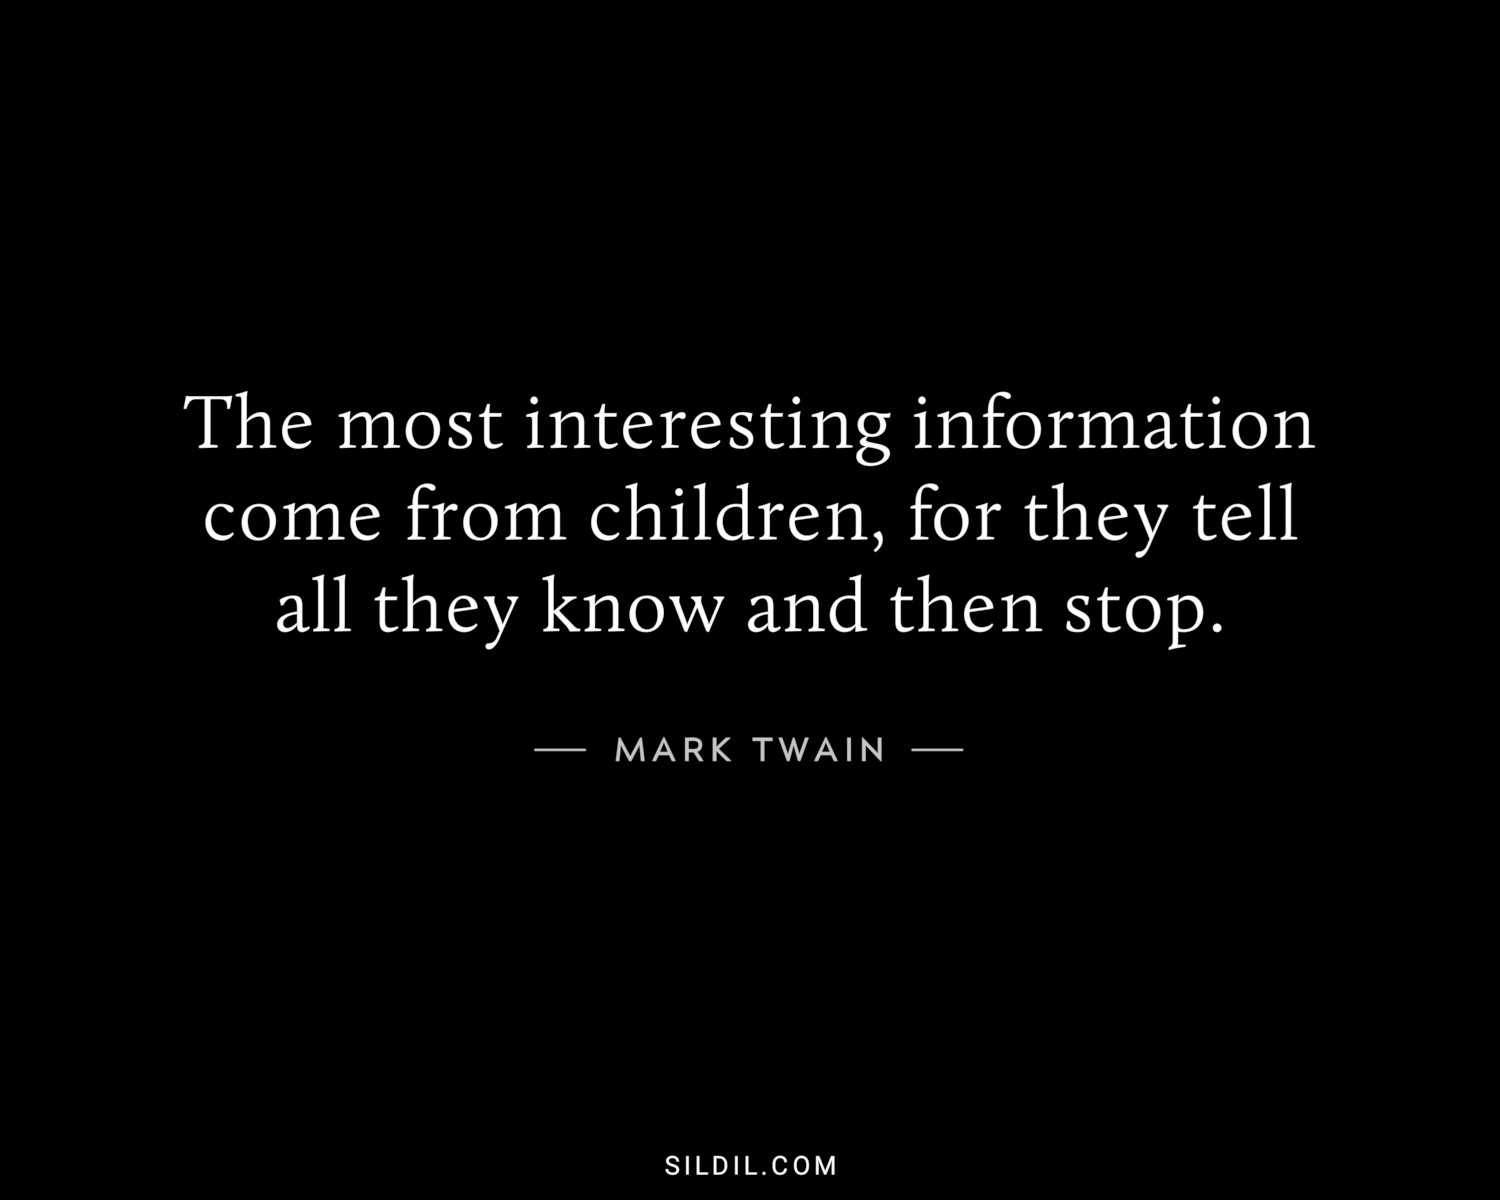 The most interesting information come from children, for they tell all they know and then stop.